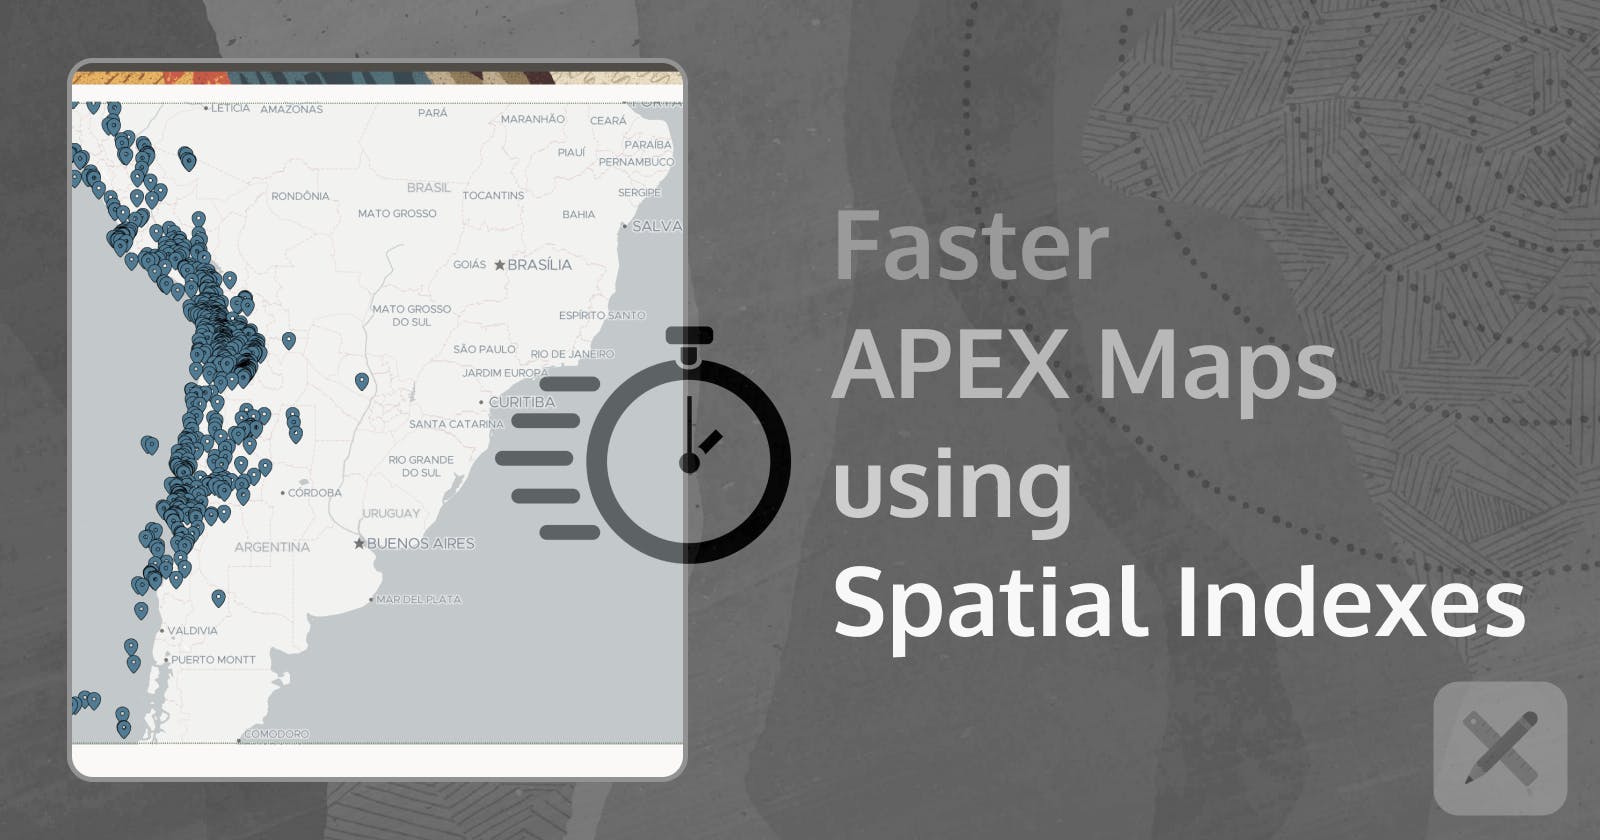 How To Optimize APEX Maps Load Time Using Spatial Indexes